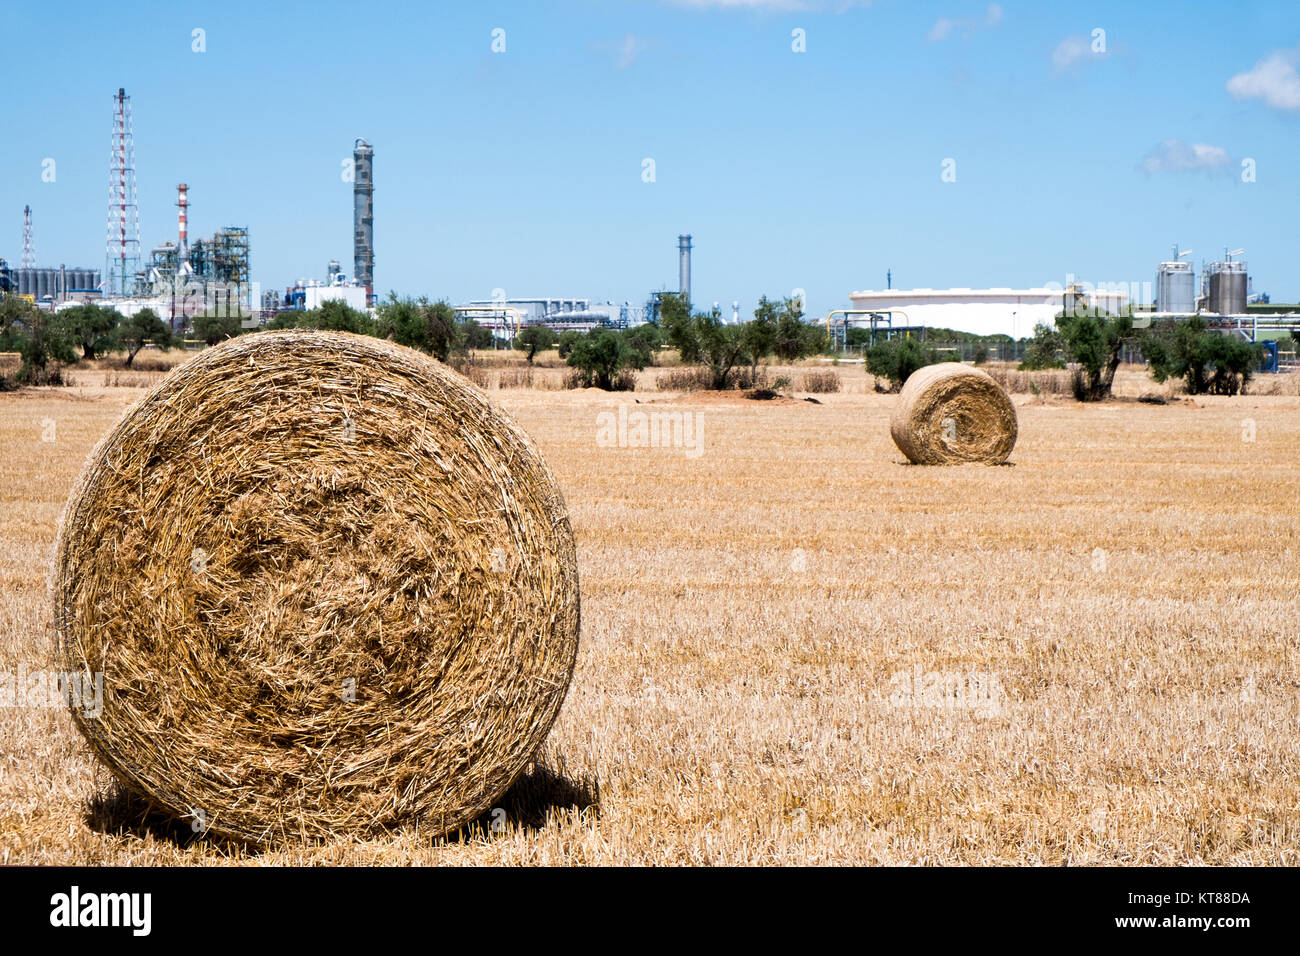 a view of a crop field in Spain, with some large round straw bales after harvesting, next to the facilities of an industry Stock Photo